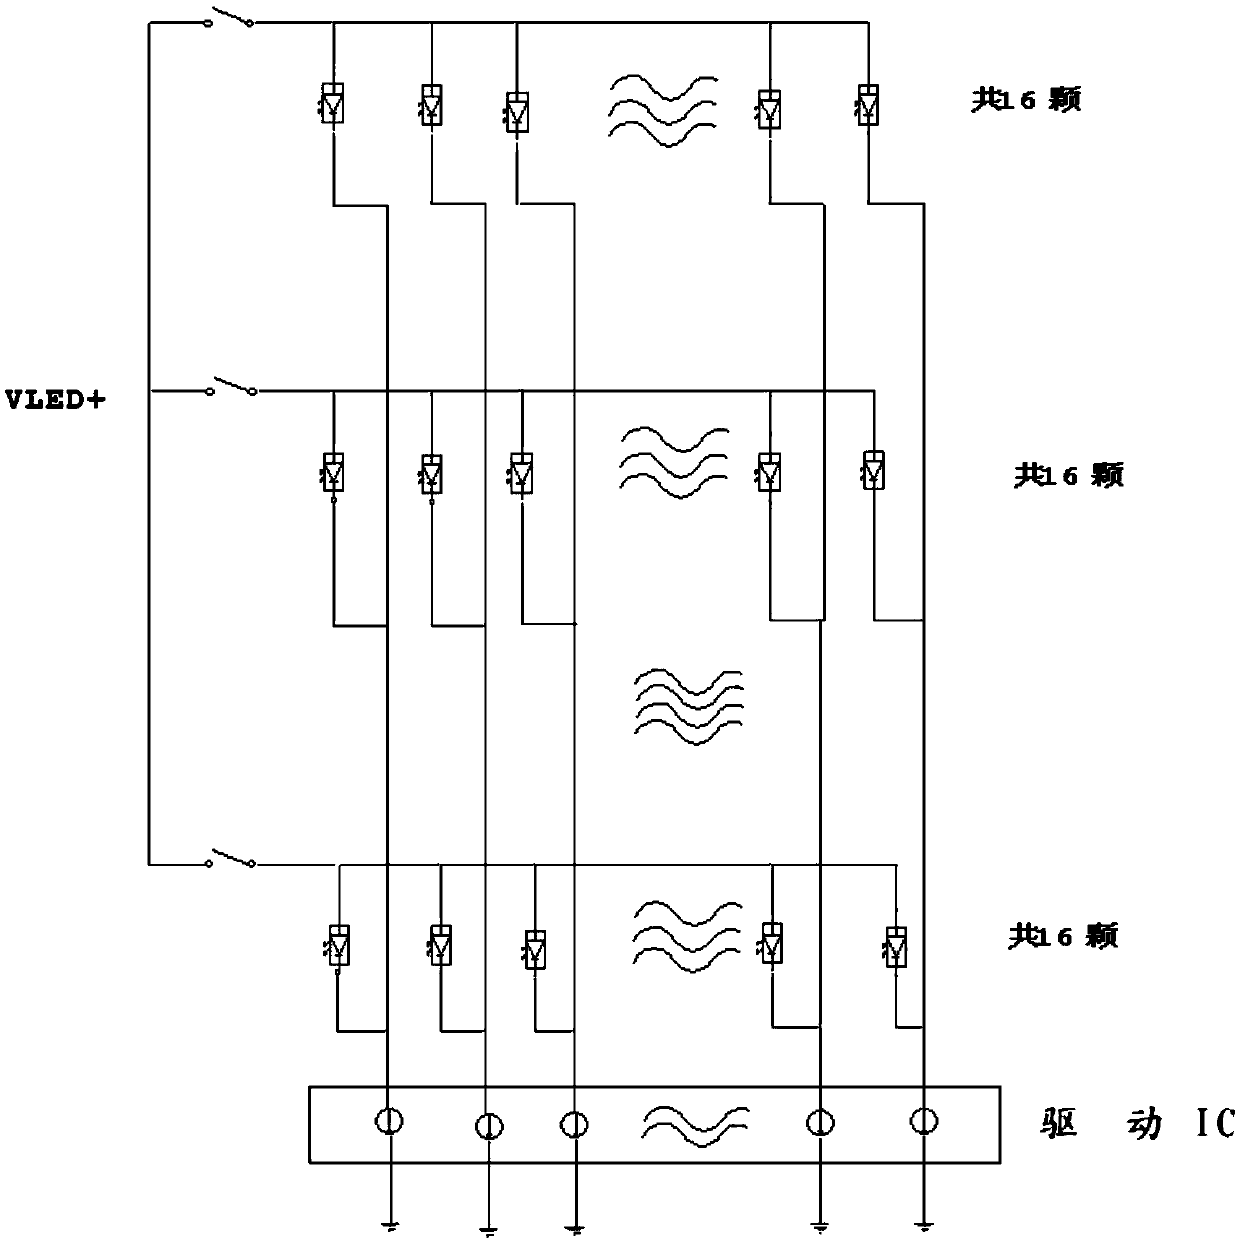 Driving control circuit for a great many of backlight partitions, and display device